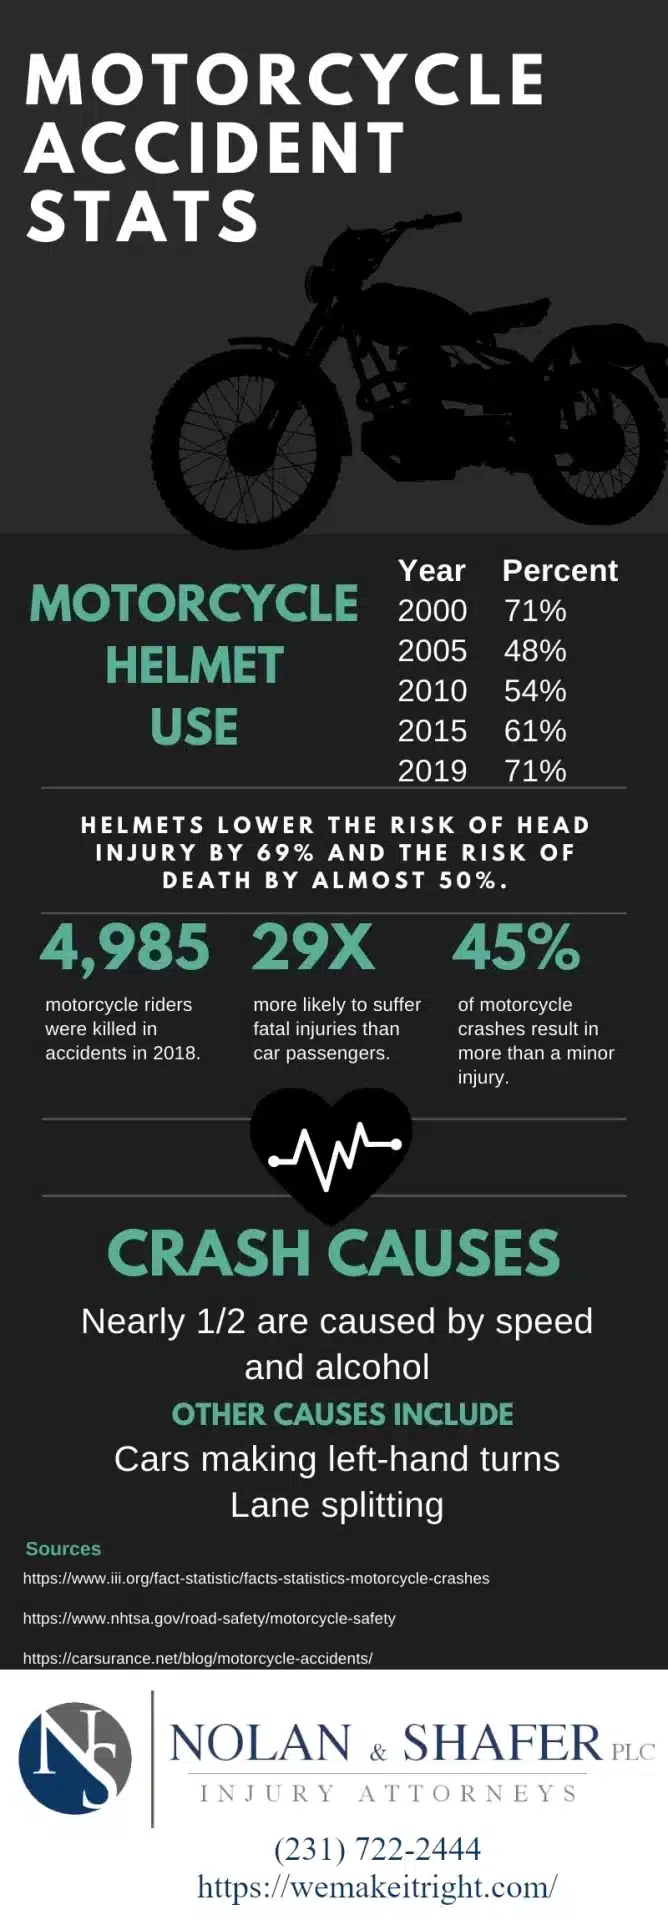 Motorcycle Safety Accident Statistics Infographic